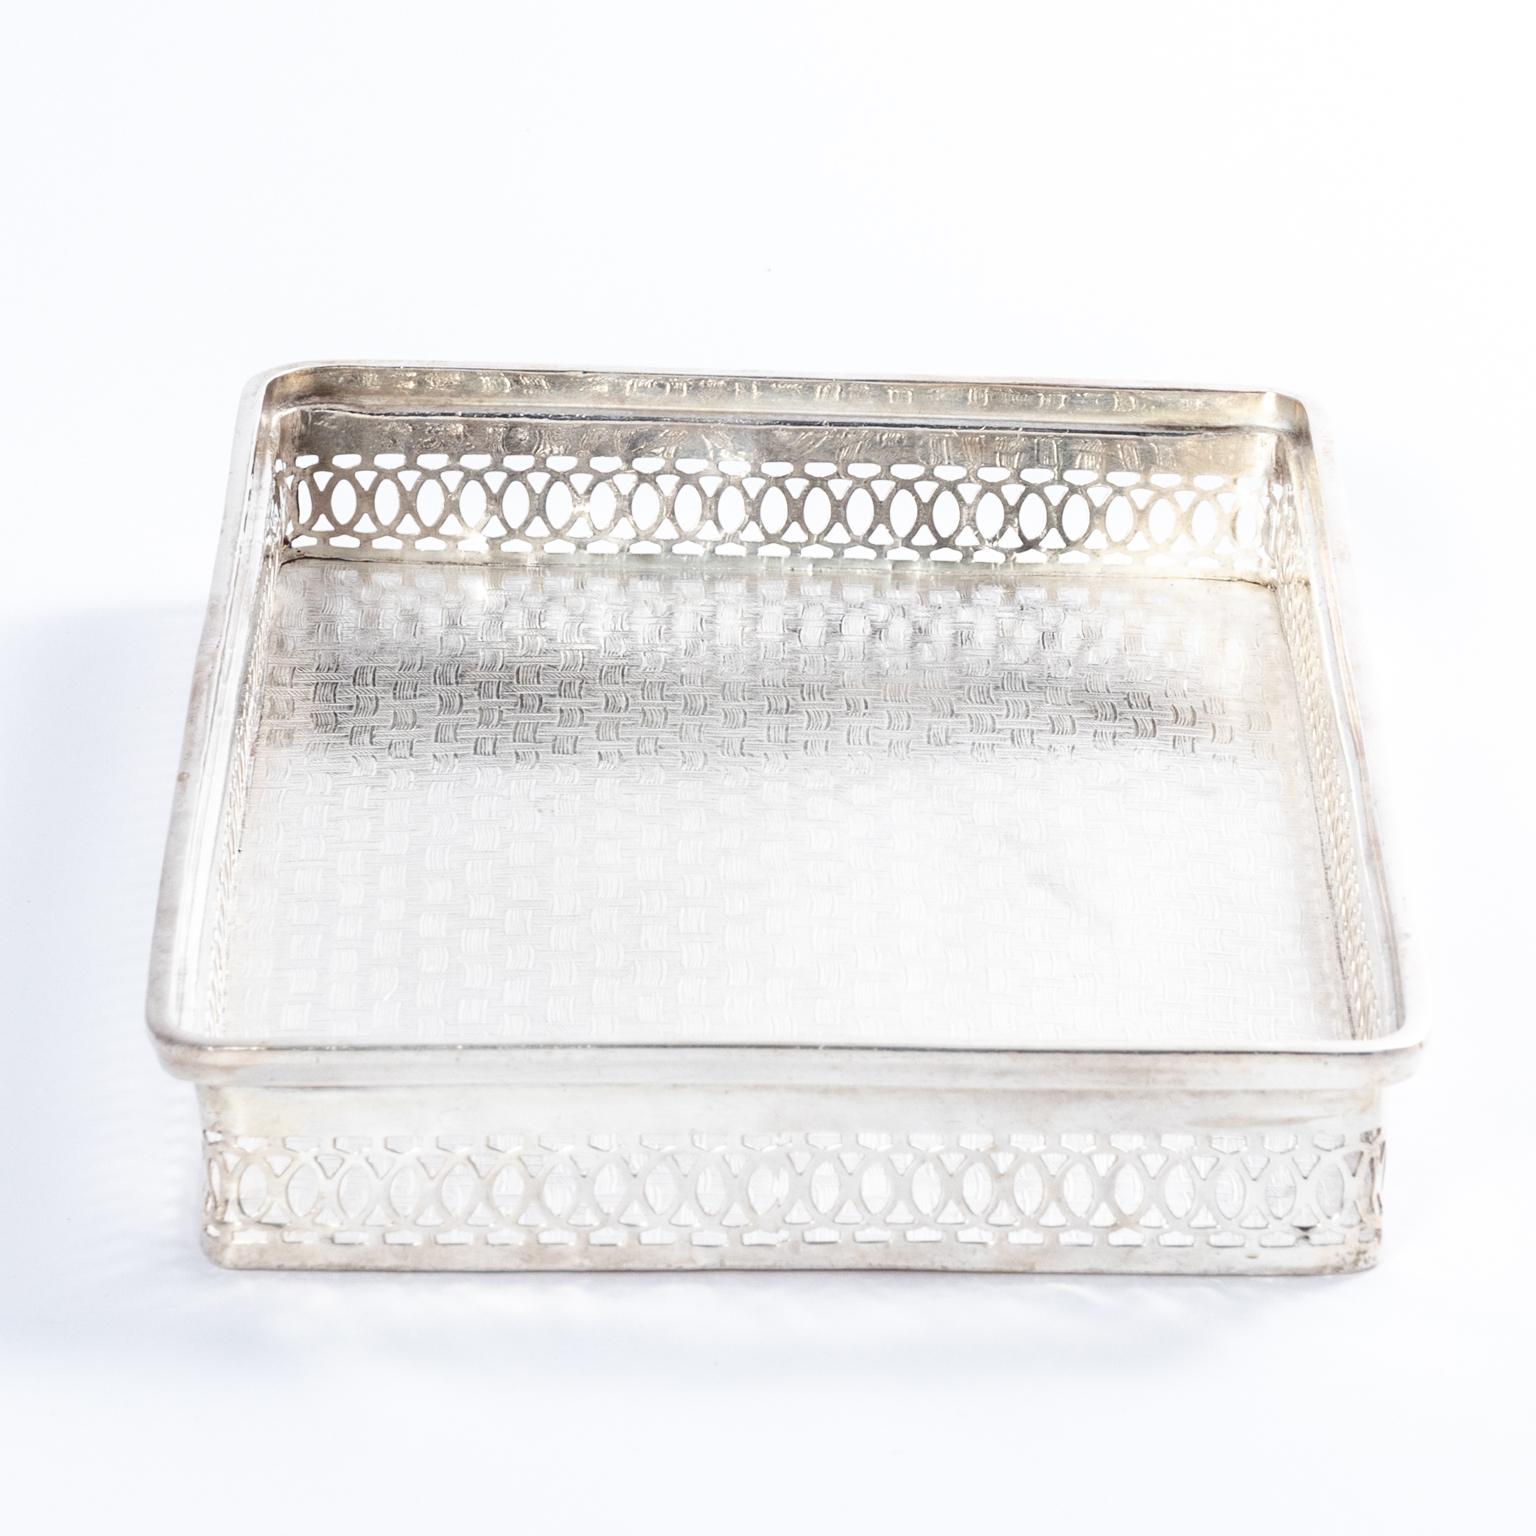 First class British Airways silver plated tray with a pierced gallery and basket weave detailing on the tray top, circa 1960s.
  